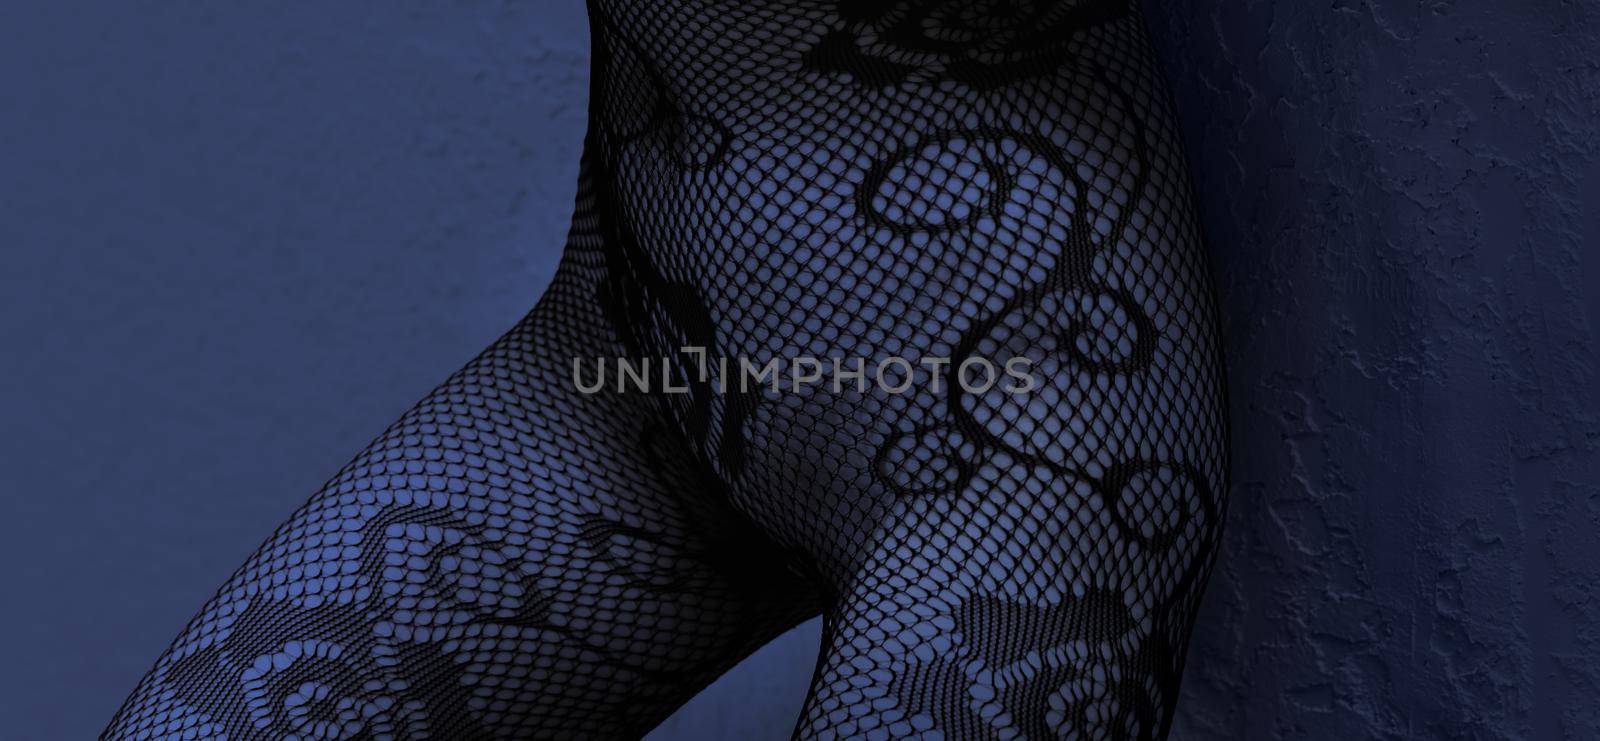 Naked woman in fishnet tights by palinchak